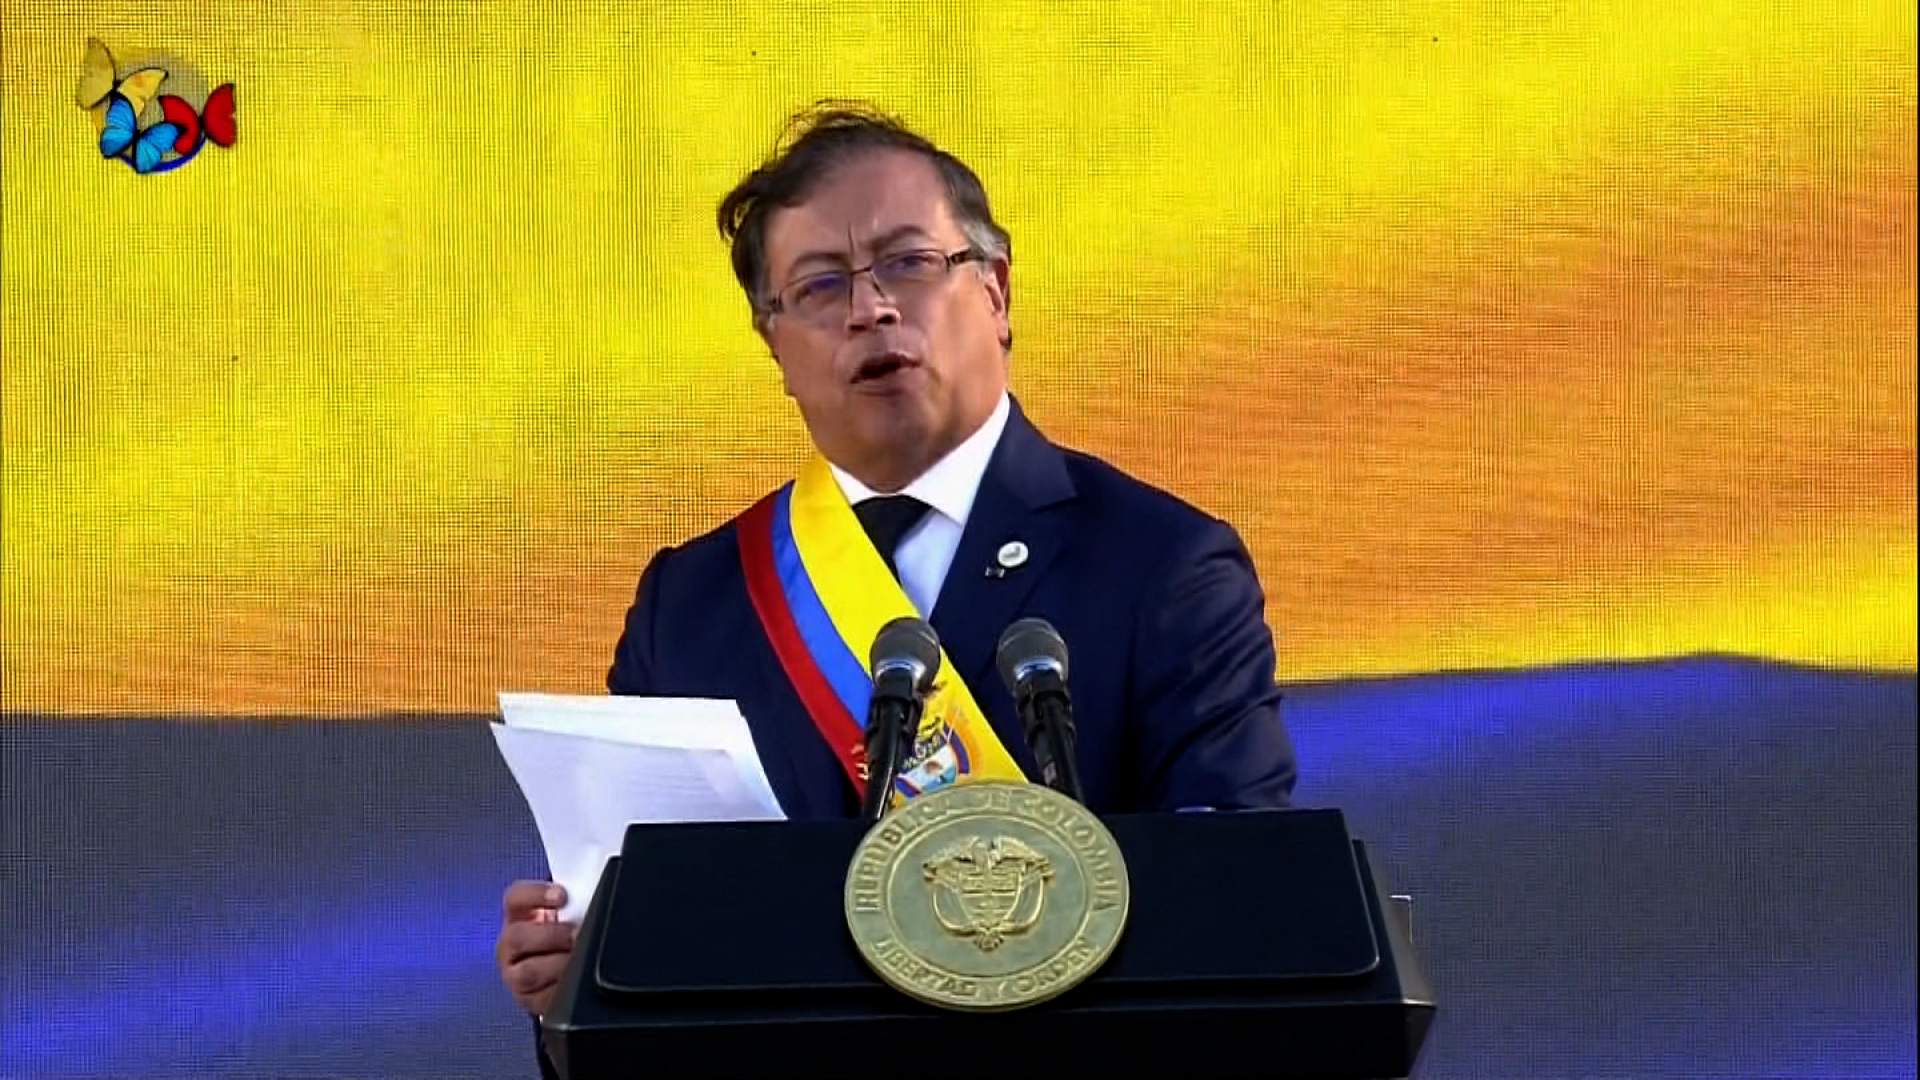 Gustavo Pedro’s inauguration as President of Colombia is live